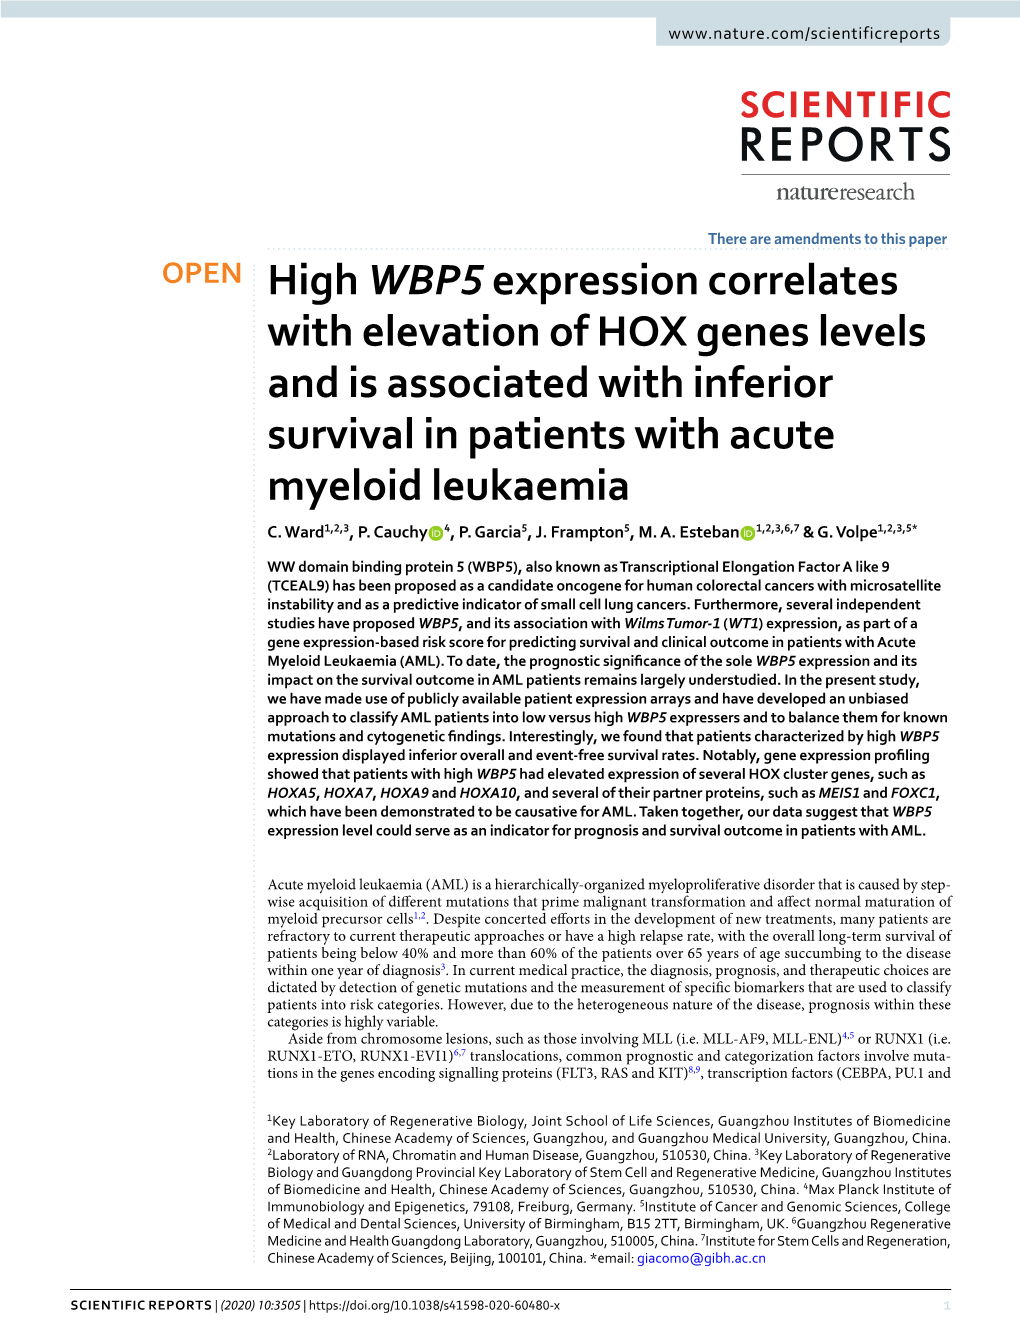 High WBP5 Expression Correlates with Elevation of HOX Genes Levels and Is Associated with Inferior Survival in Patients with Acute Myeloid Leukaemia C